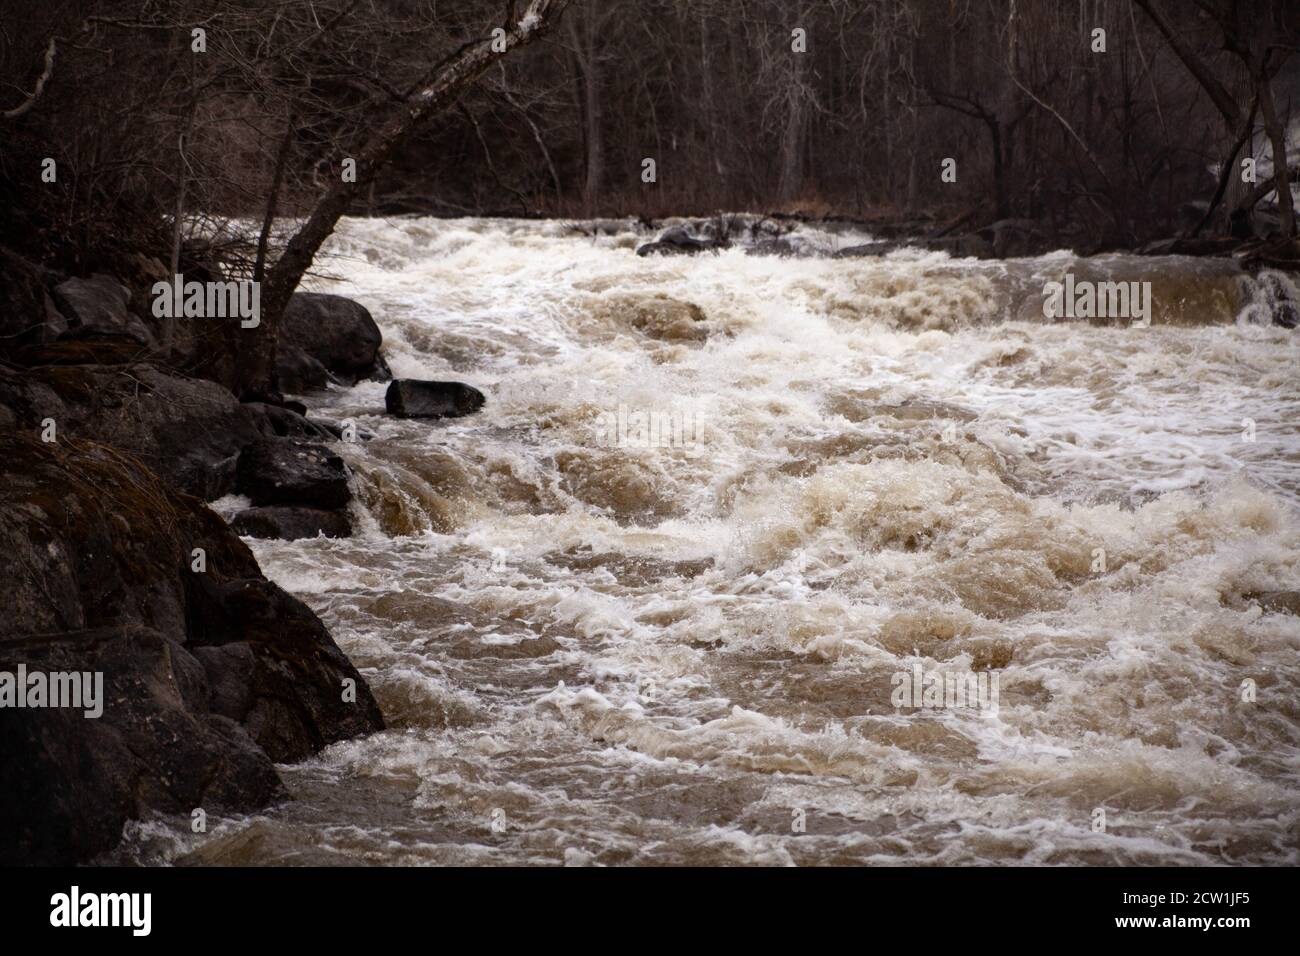 The rapid mountain river during a flood, woods, and rocks on both banks; landscape in dark colors on a gloomy day. Stock Photo